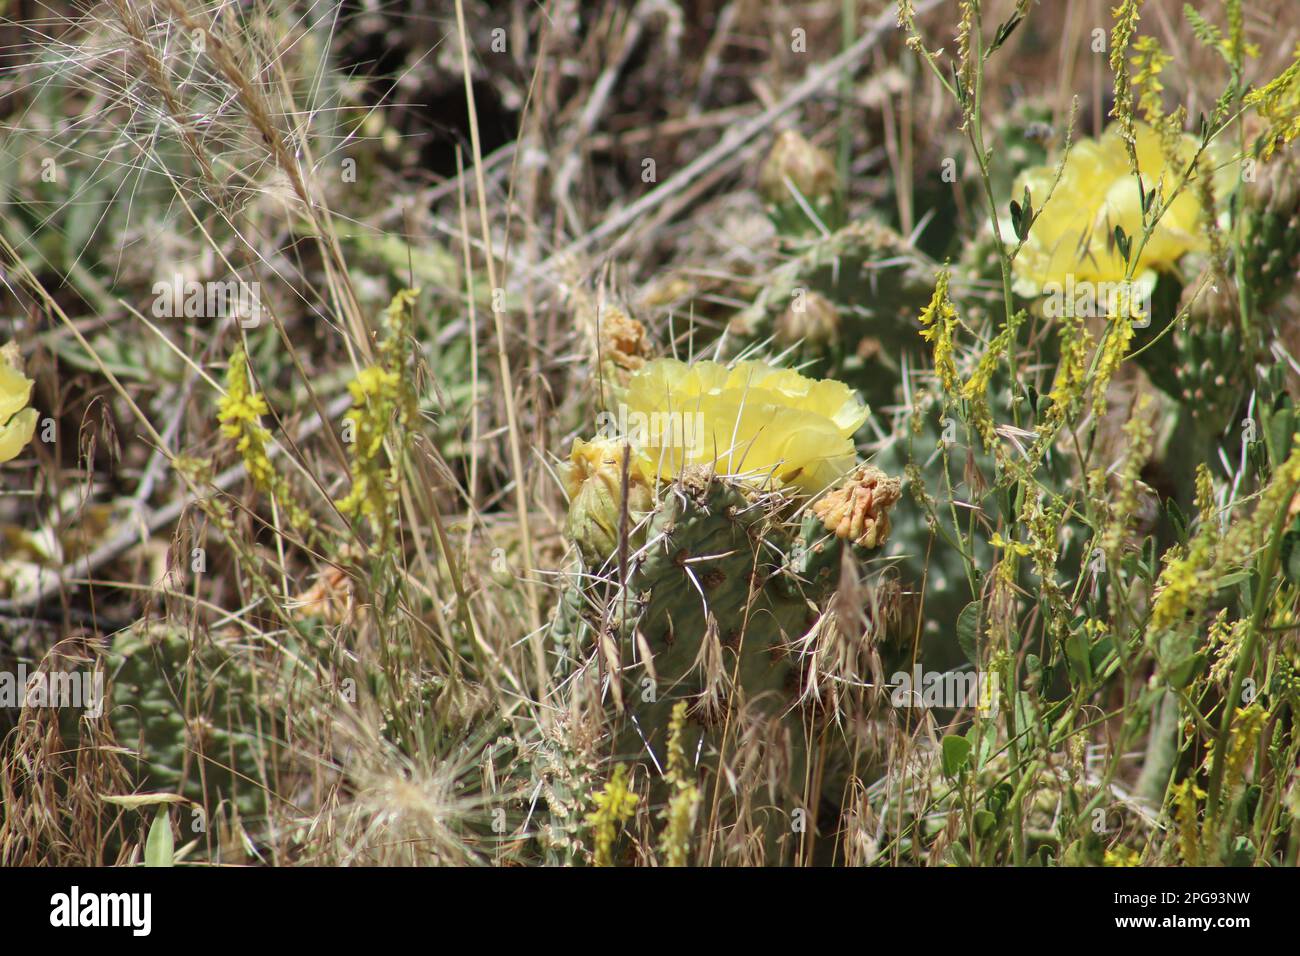 Clumps of low-lying Chaparral prickly pear cacti flowering and surrounded by long grass in southwestern Utah Stock Photo